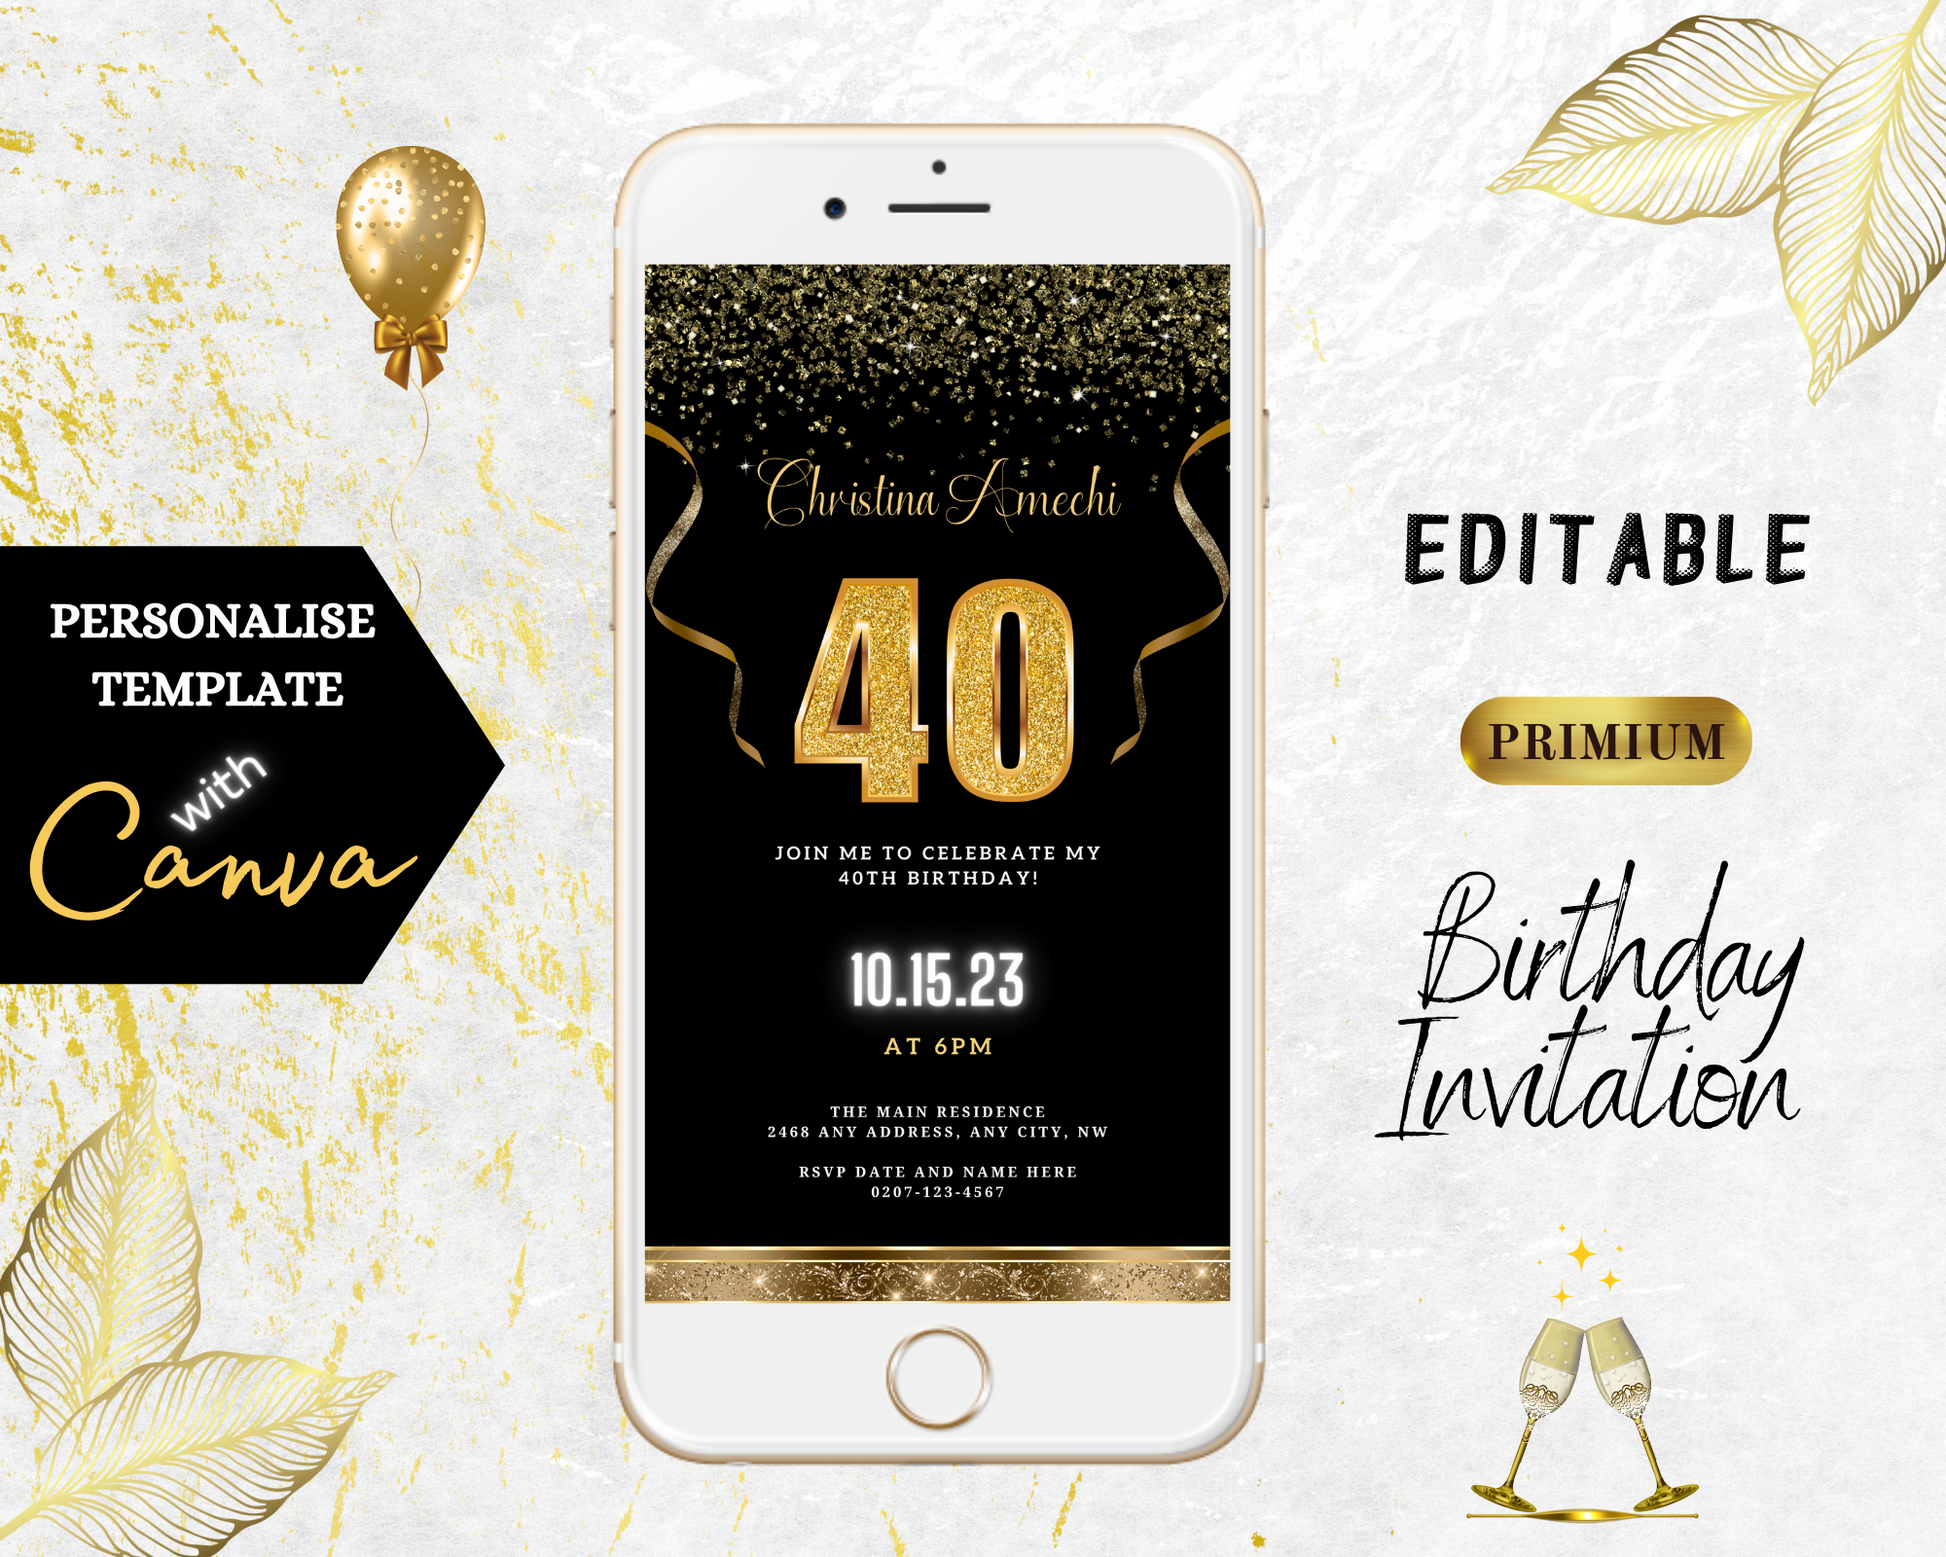 Black Gold Confetti 40th Birthday Evite showing customizable digital invitation with gold text, balloons, and champagne glasses for smartphone use.